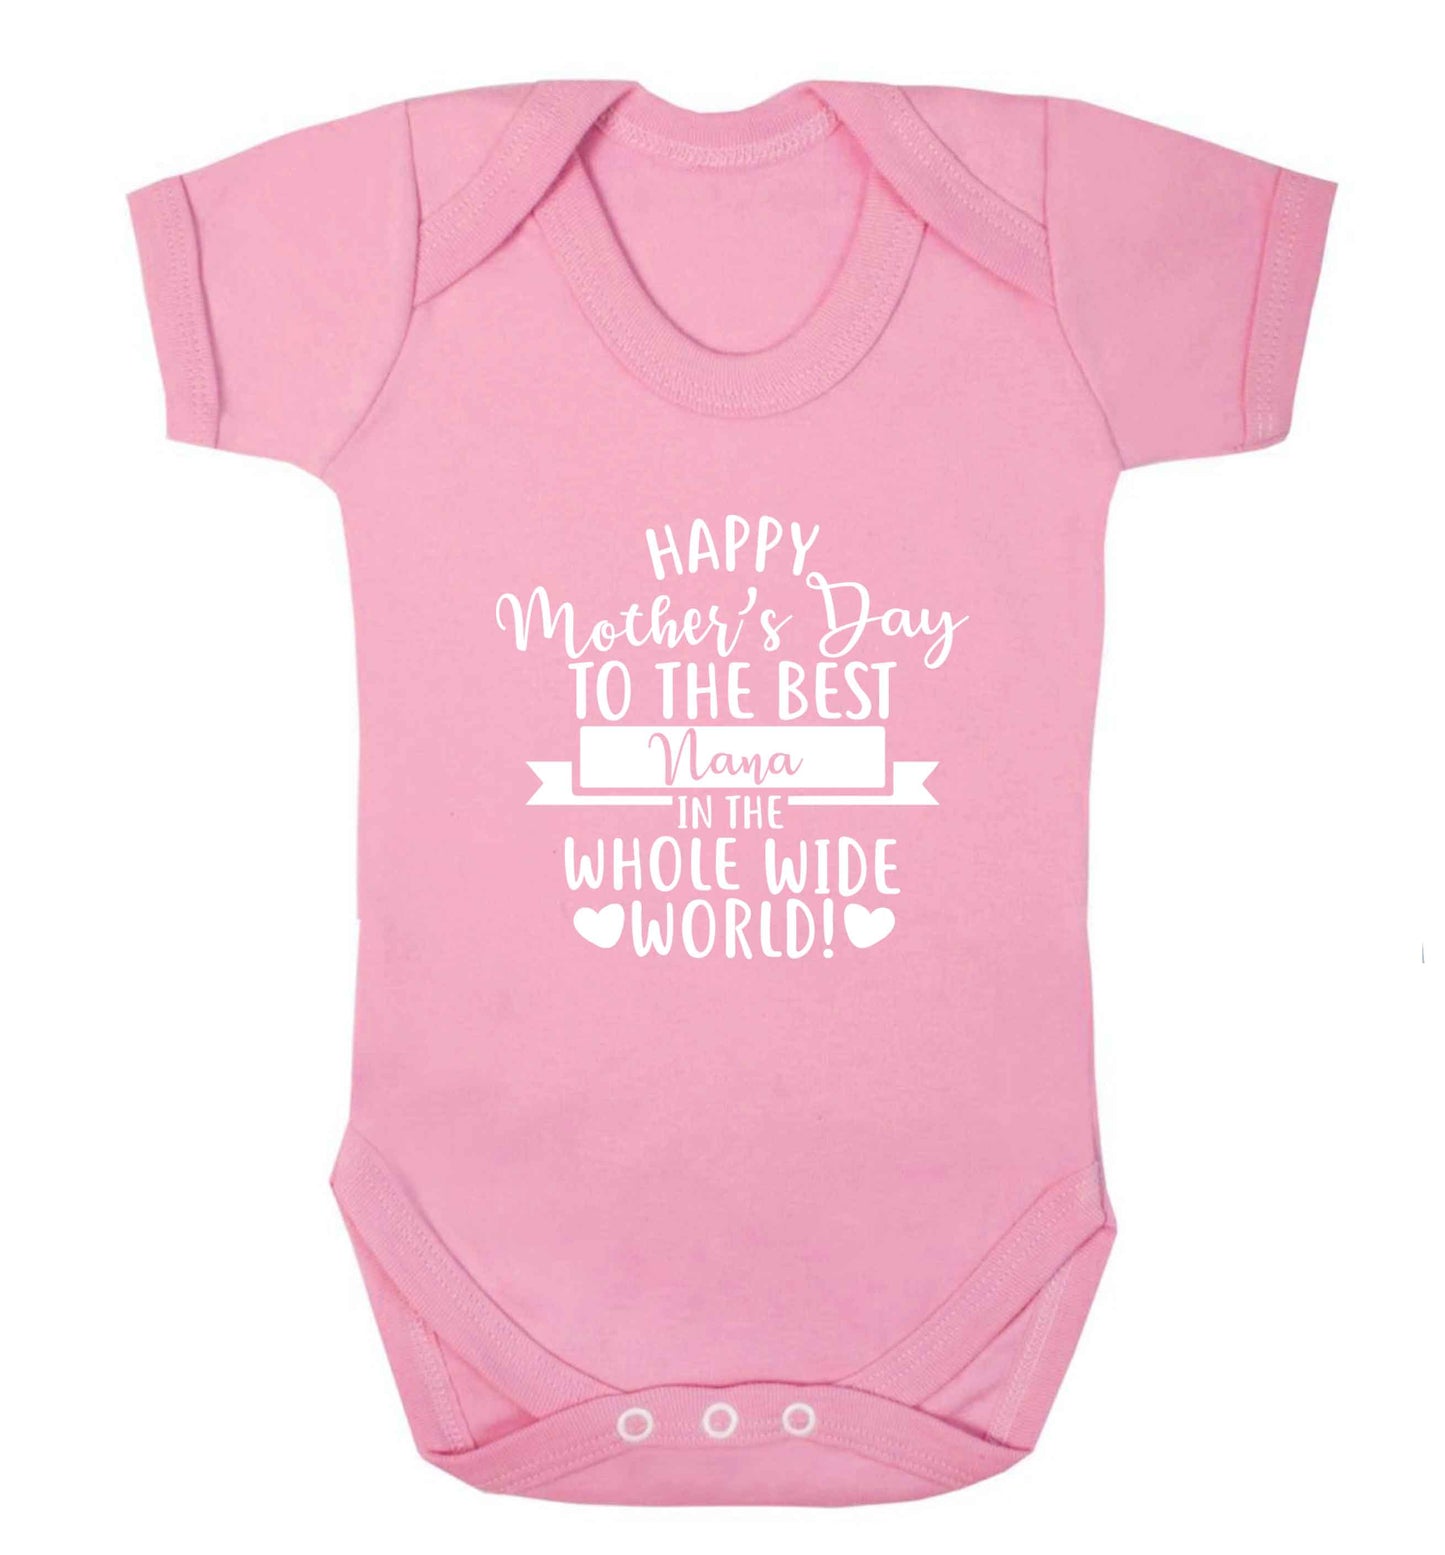 Happy mother's day to the best nana in the world baby vest pale pink 18-24 months